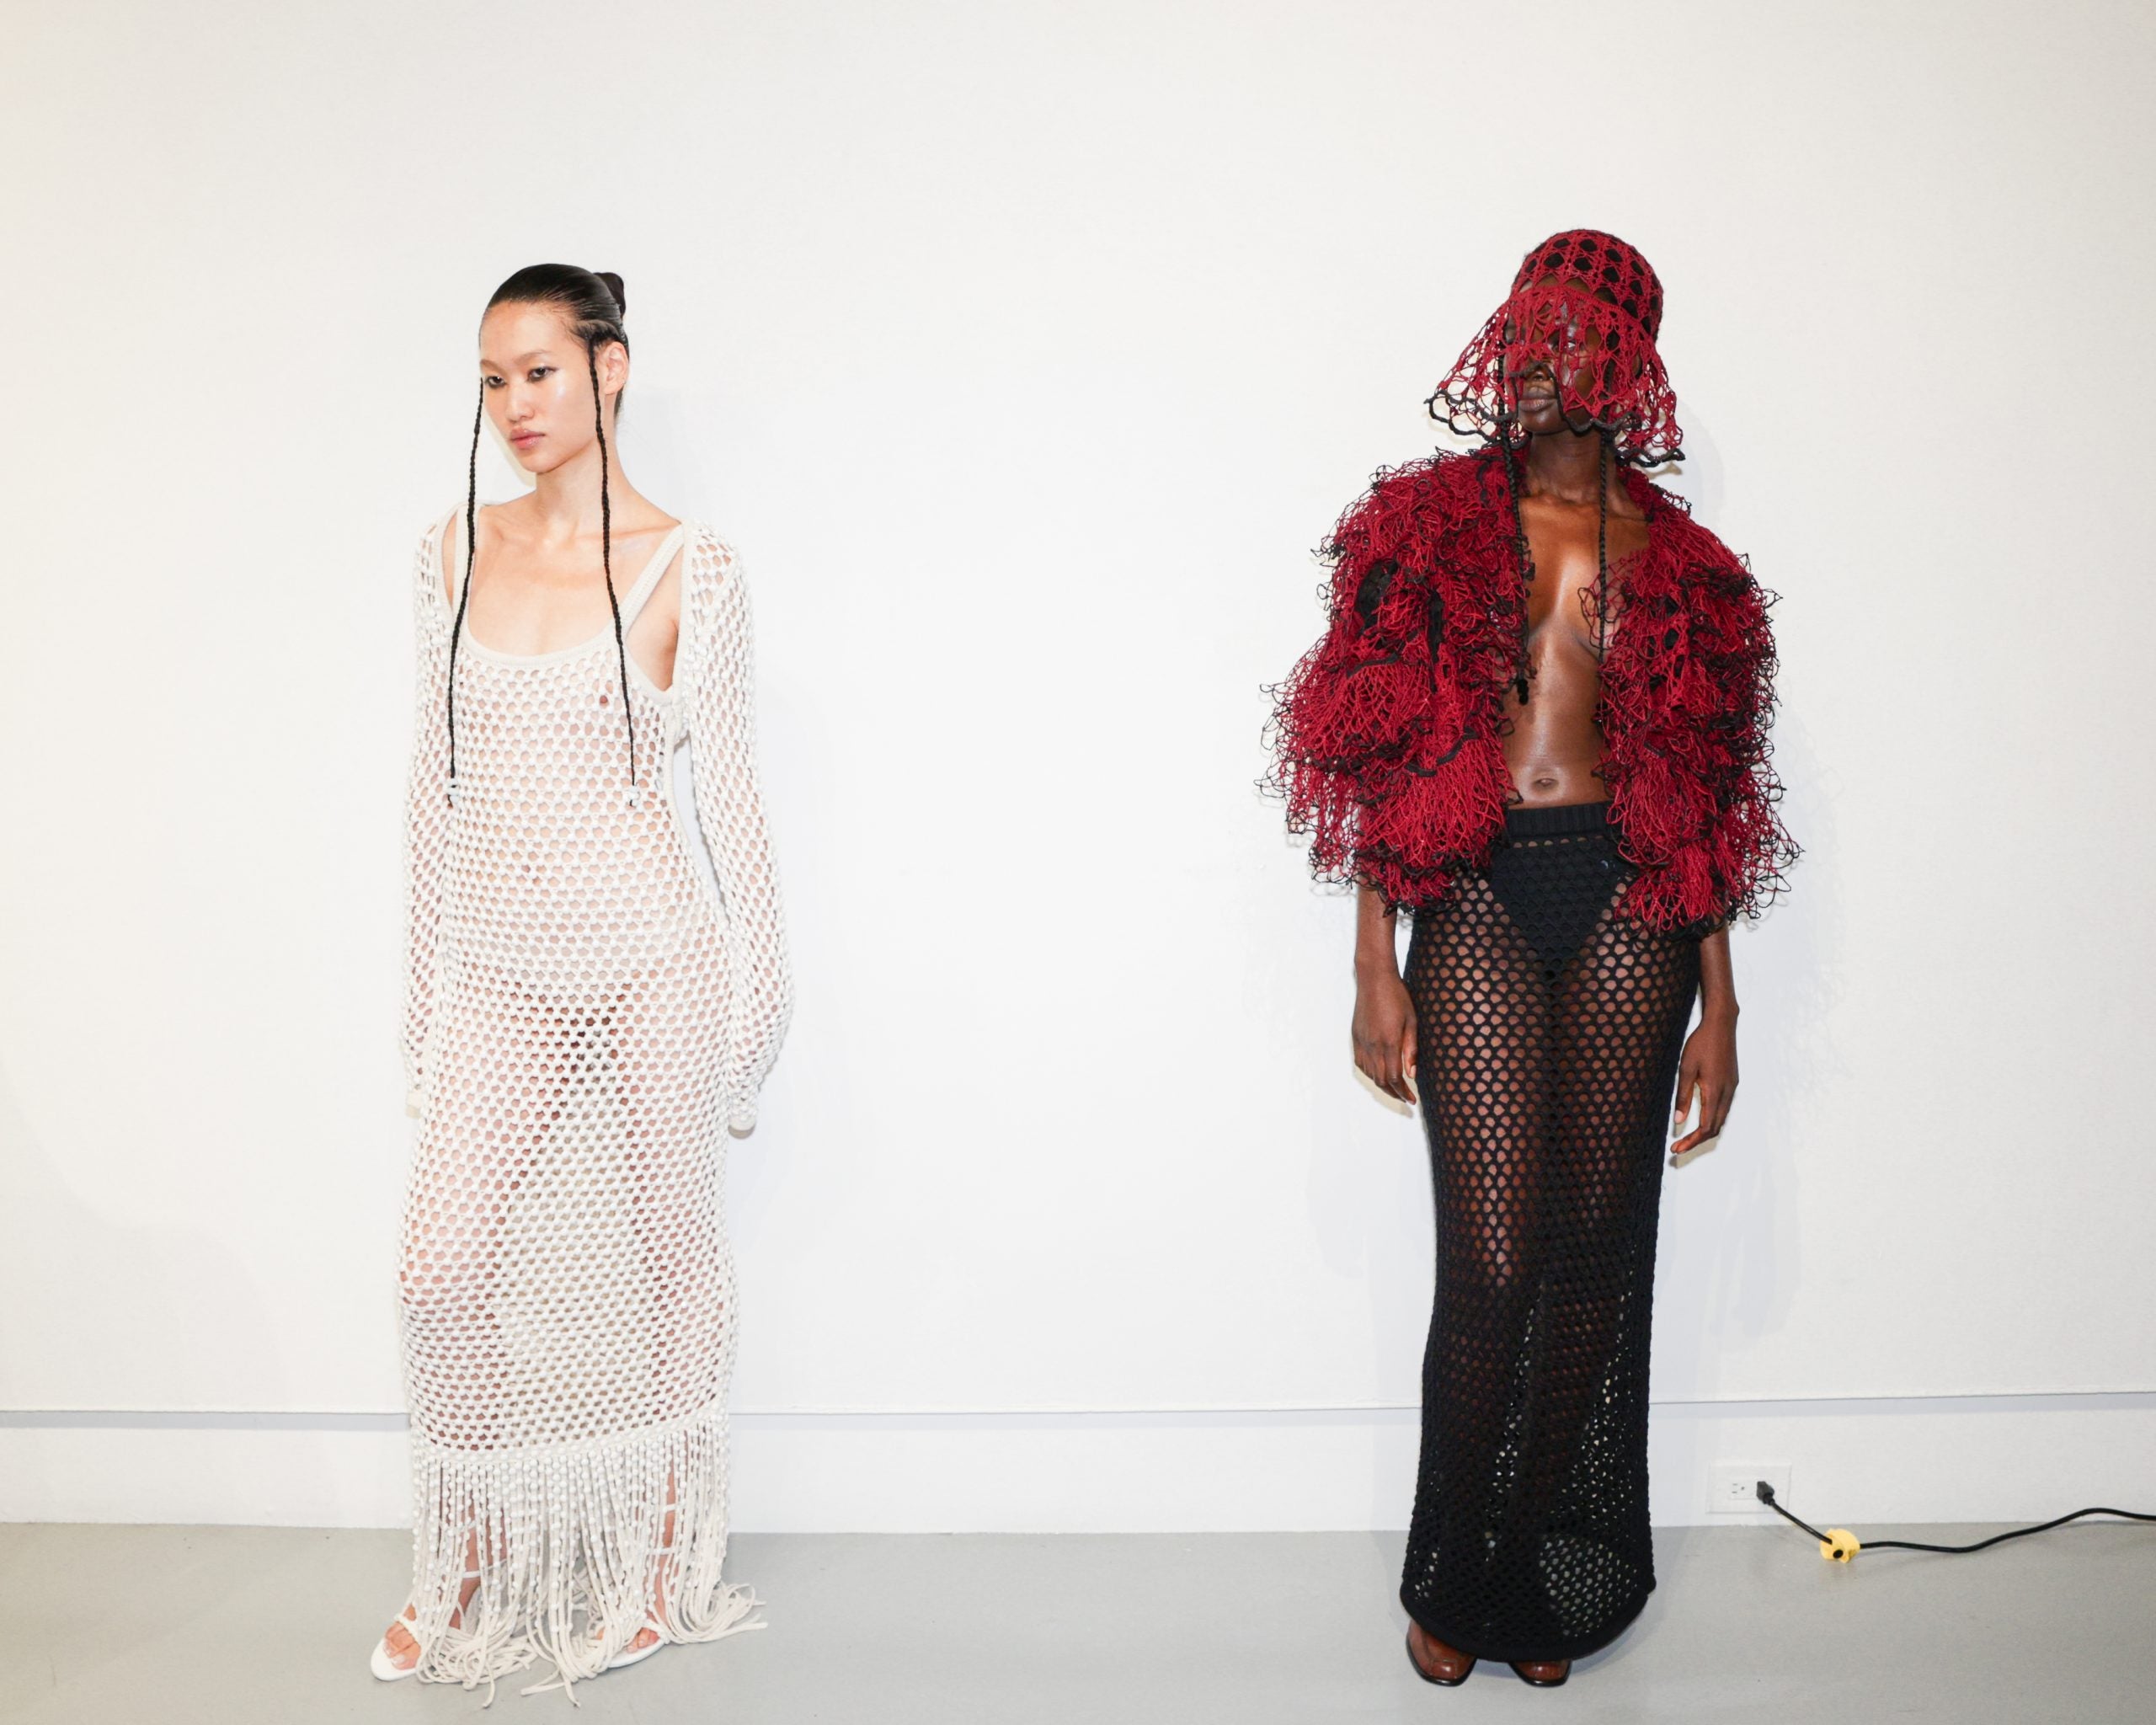 Rachel Scott Is Subverting Caribbean Tropes In Latest Diotima Collection